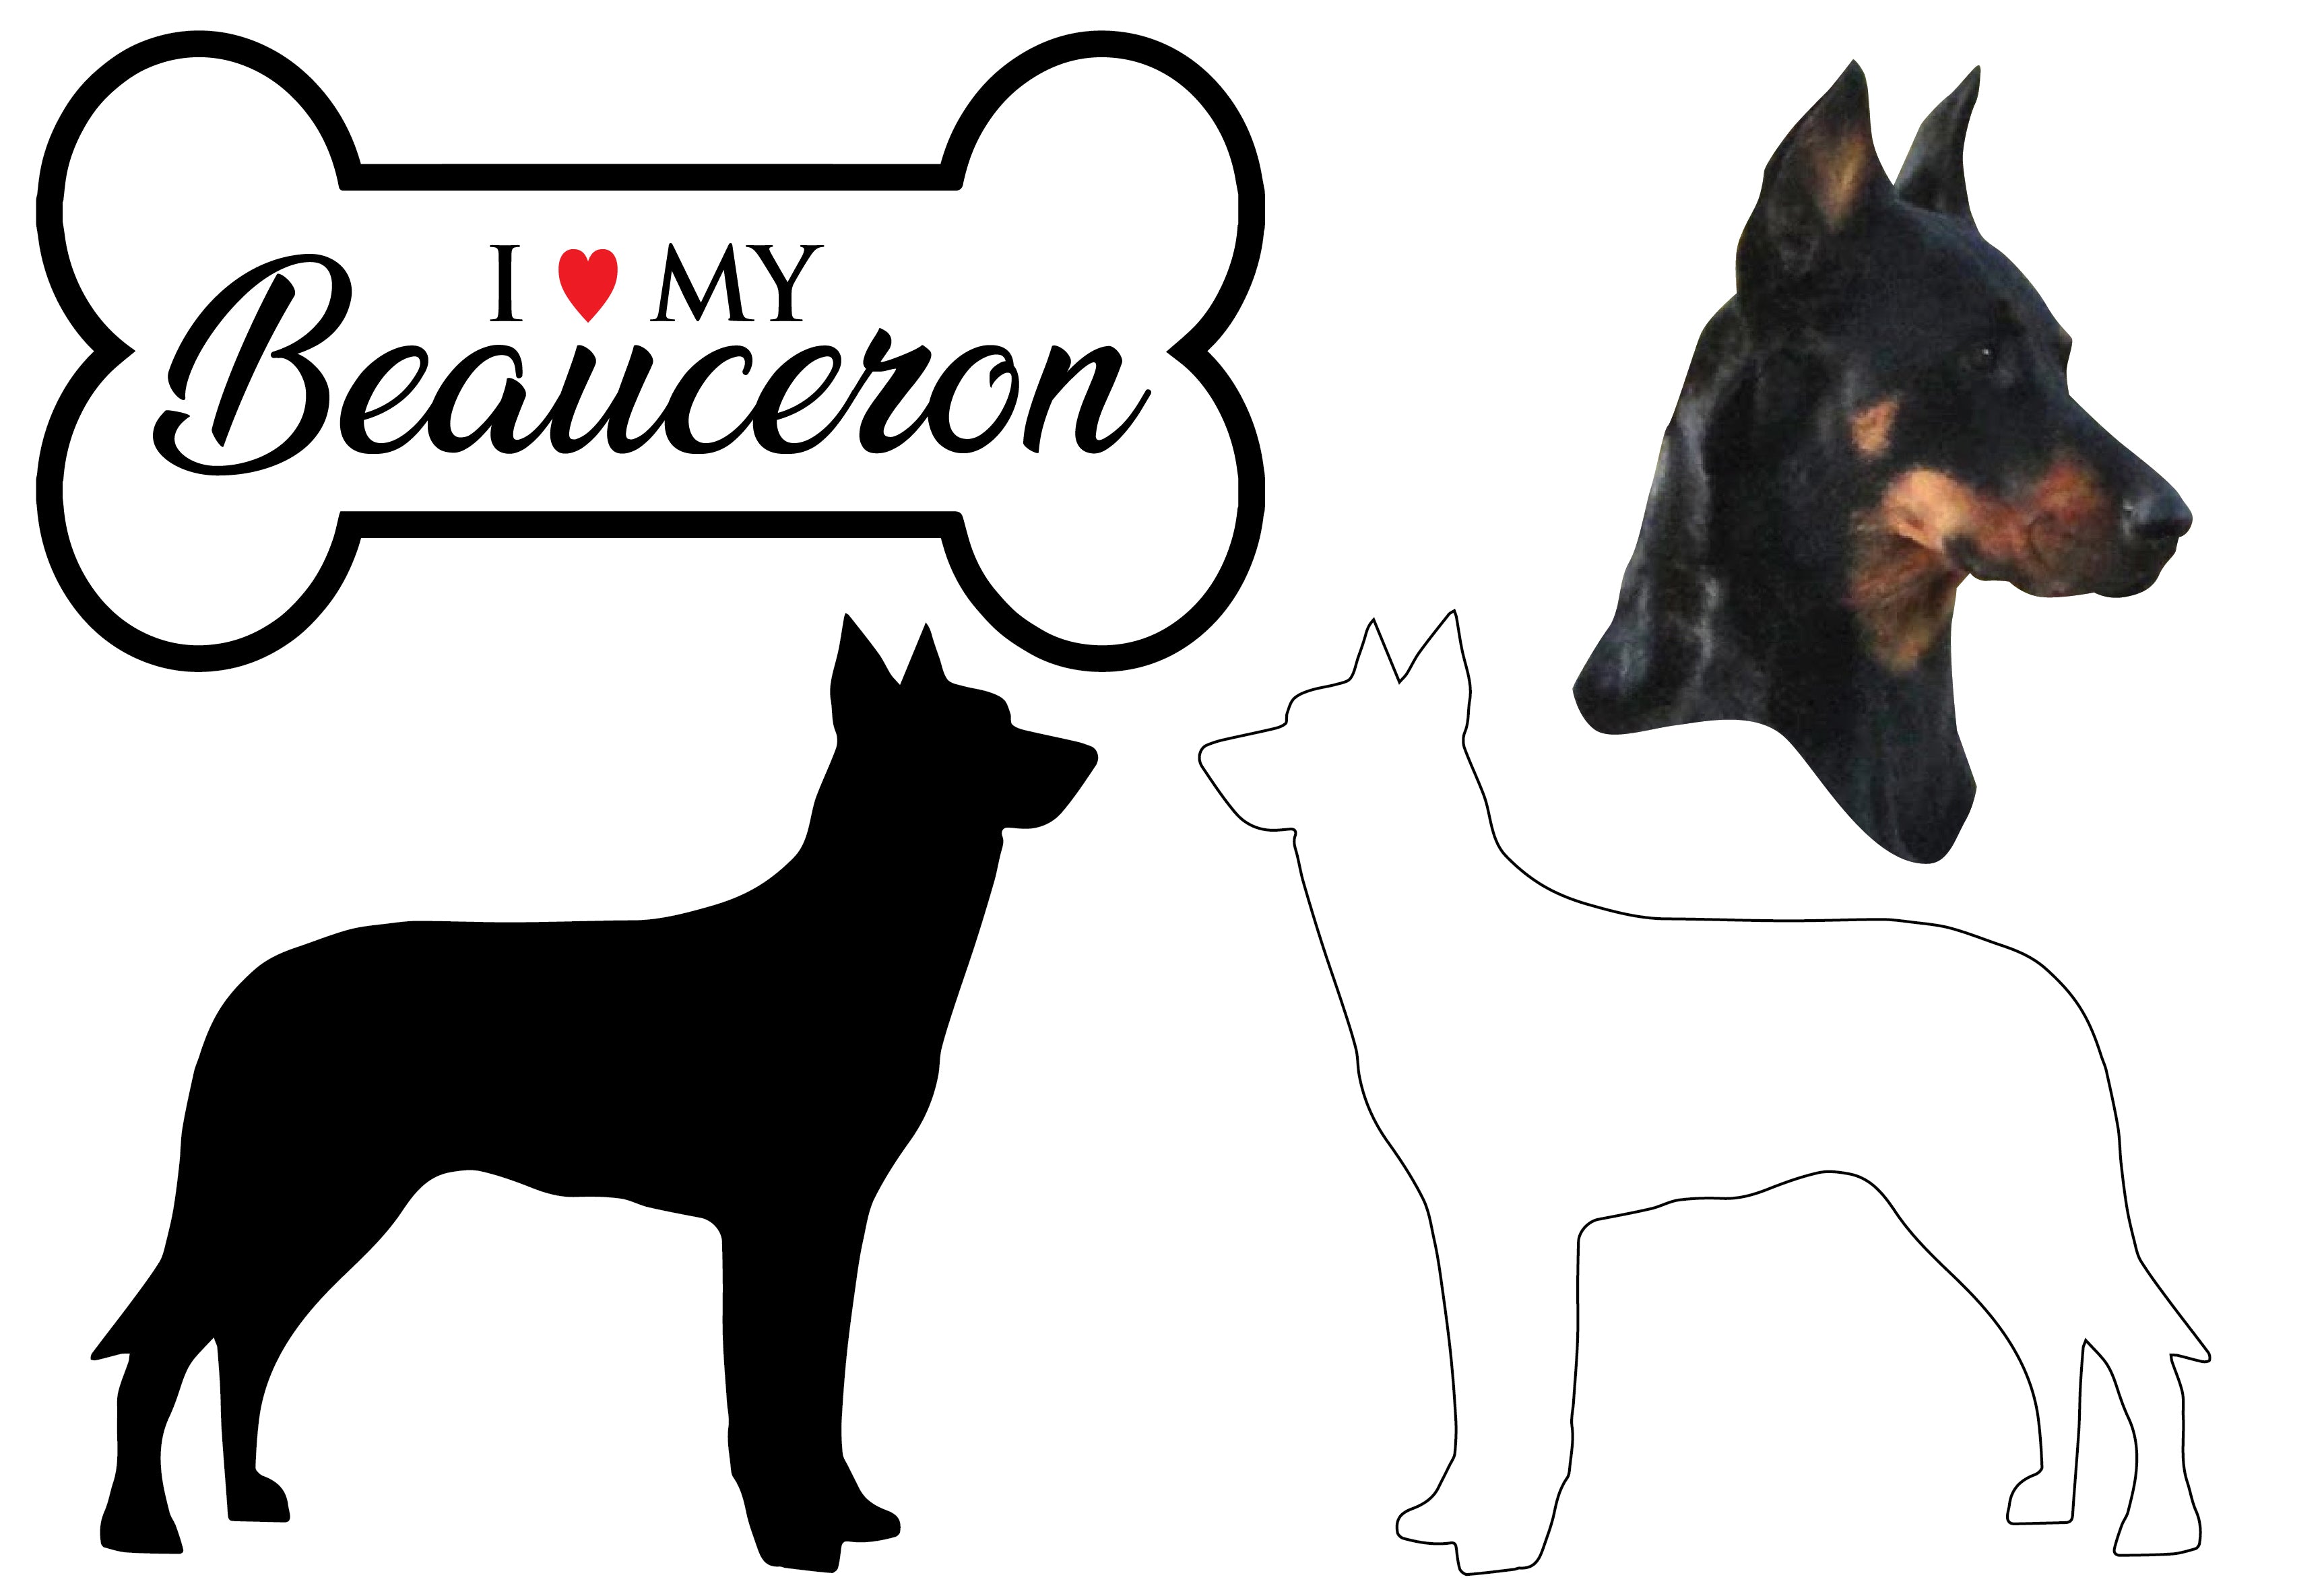 Beauceron - Dog Breed Decals (Set of 16) - Sizes in Description